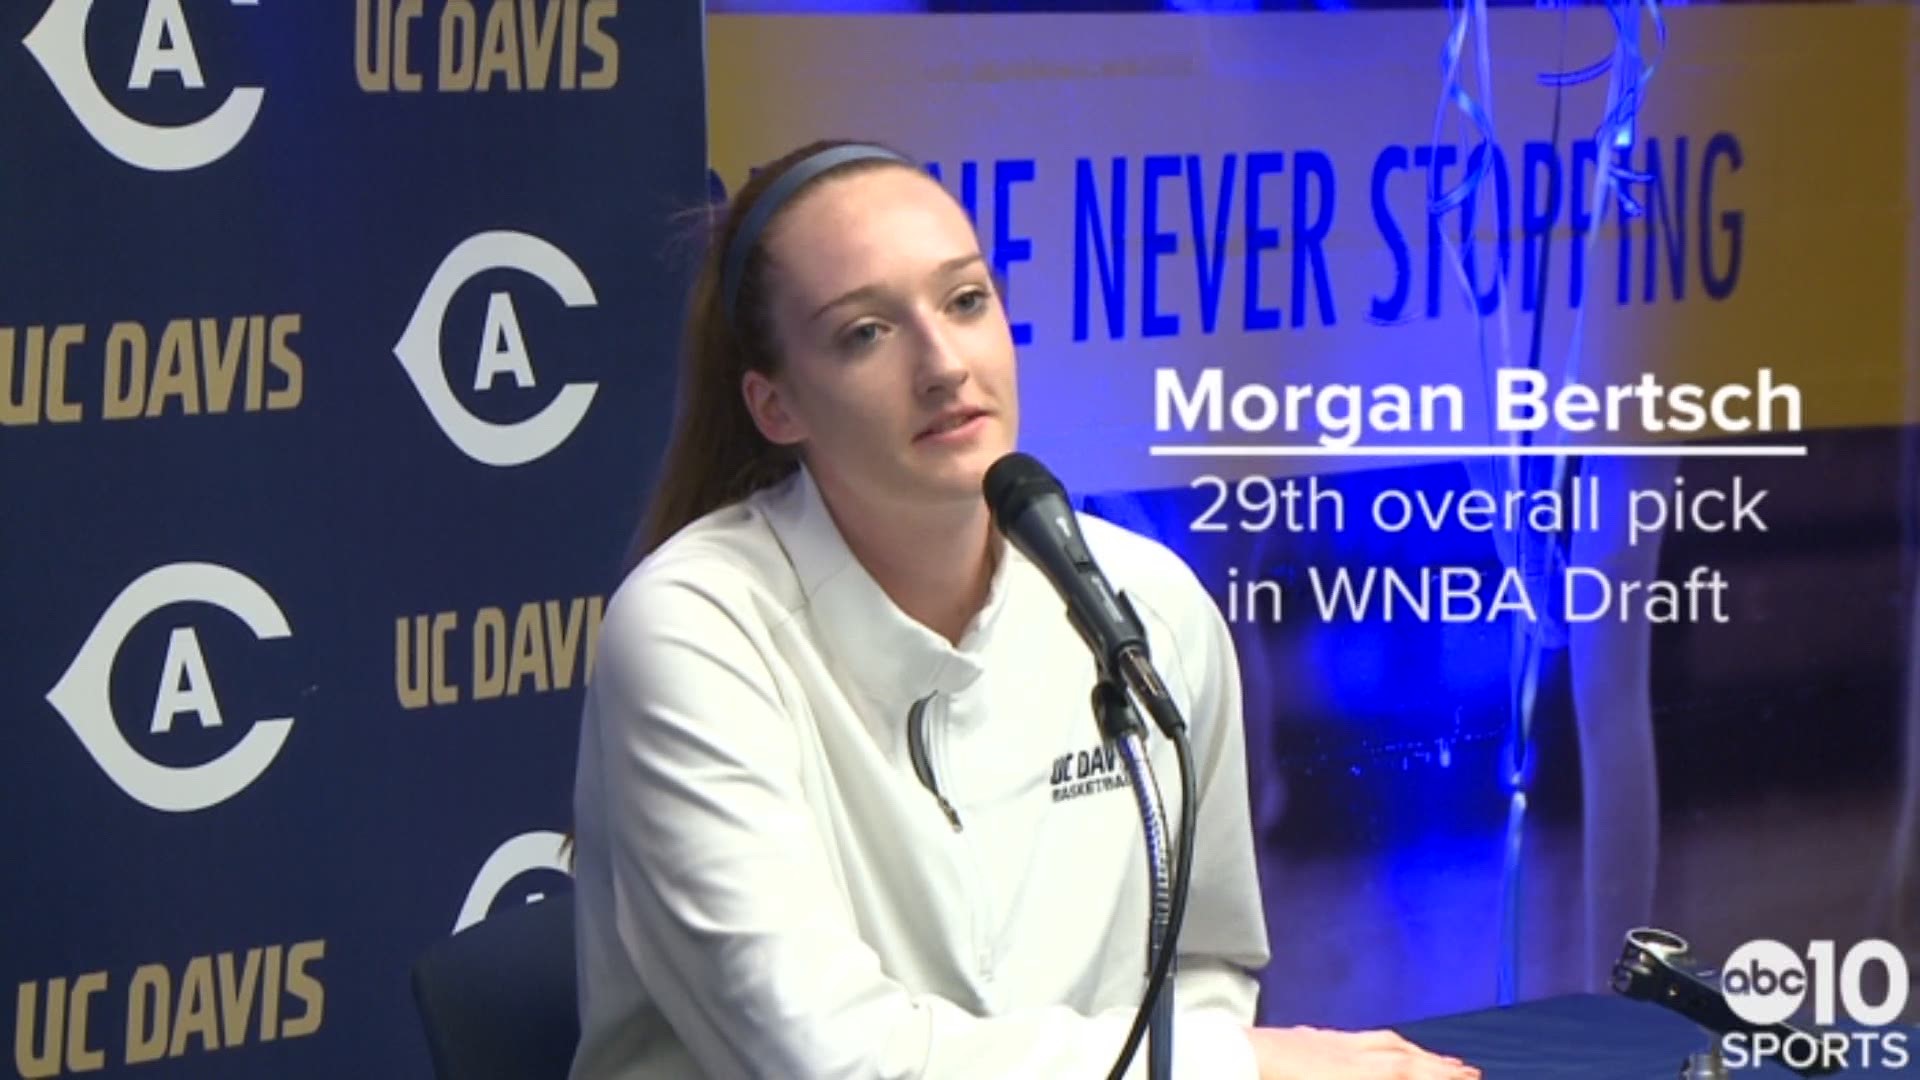 UC Davis basketball star Morgan Bertsch makes history again as the first Aggie ever to be selected in the WNBA Draft